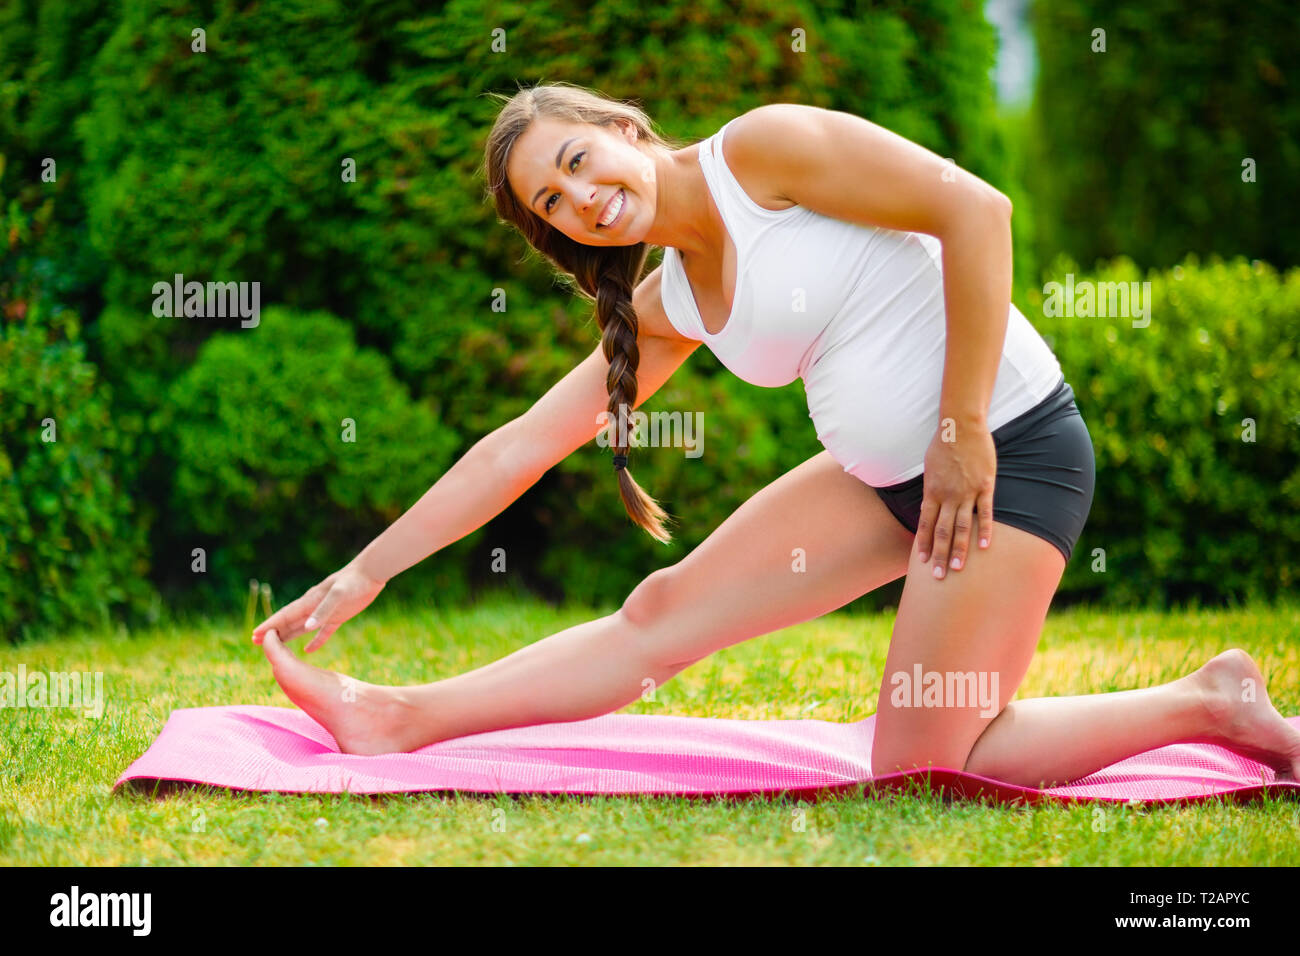 Pregnant Woman Smiling While Touching Toe sur tapis d'exercice Banque D'Images